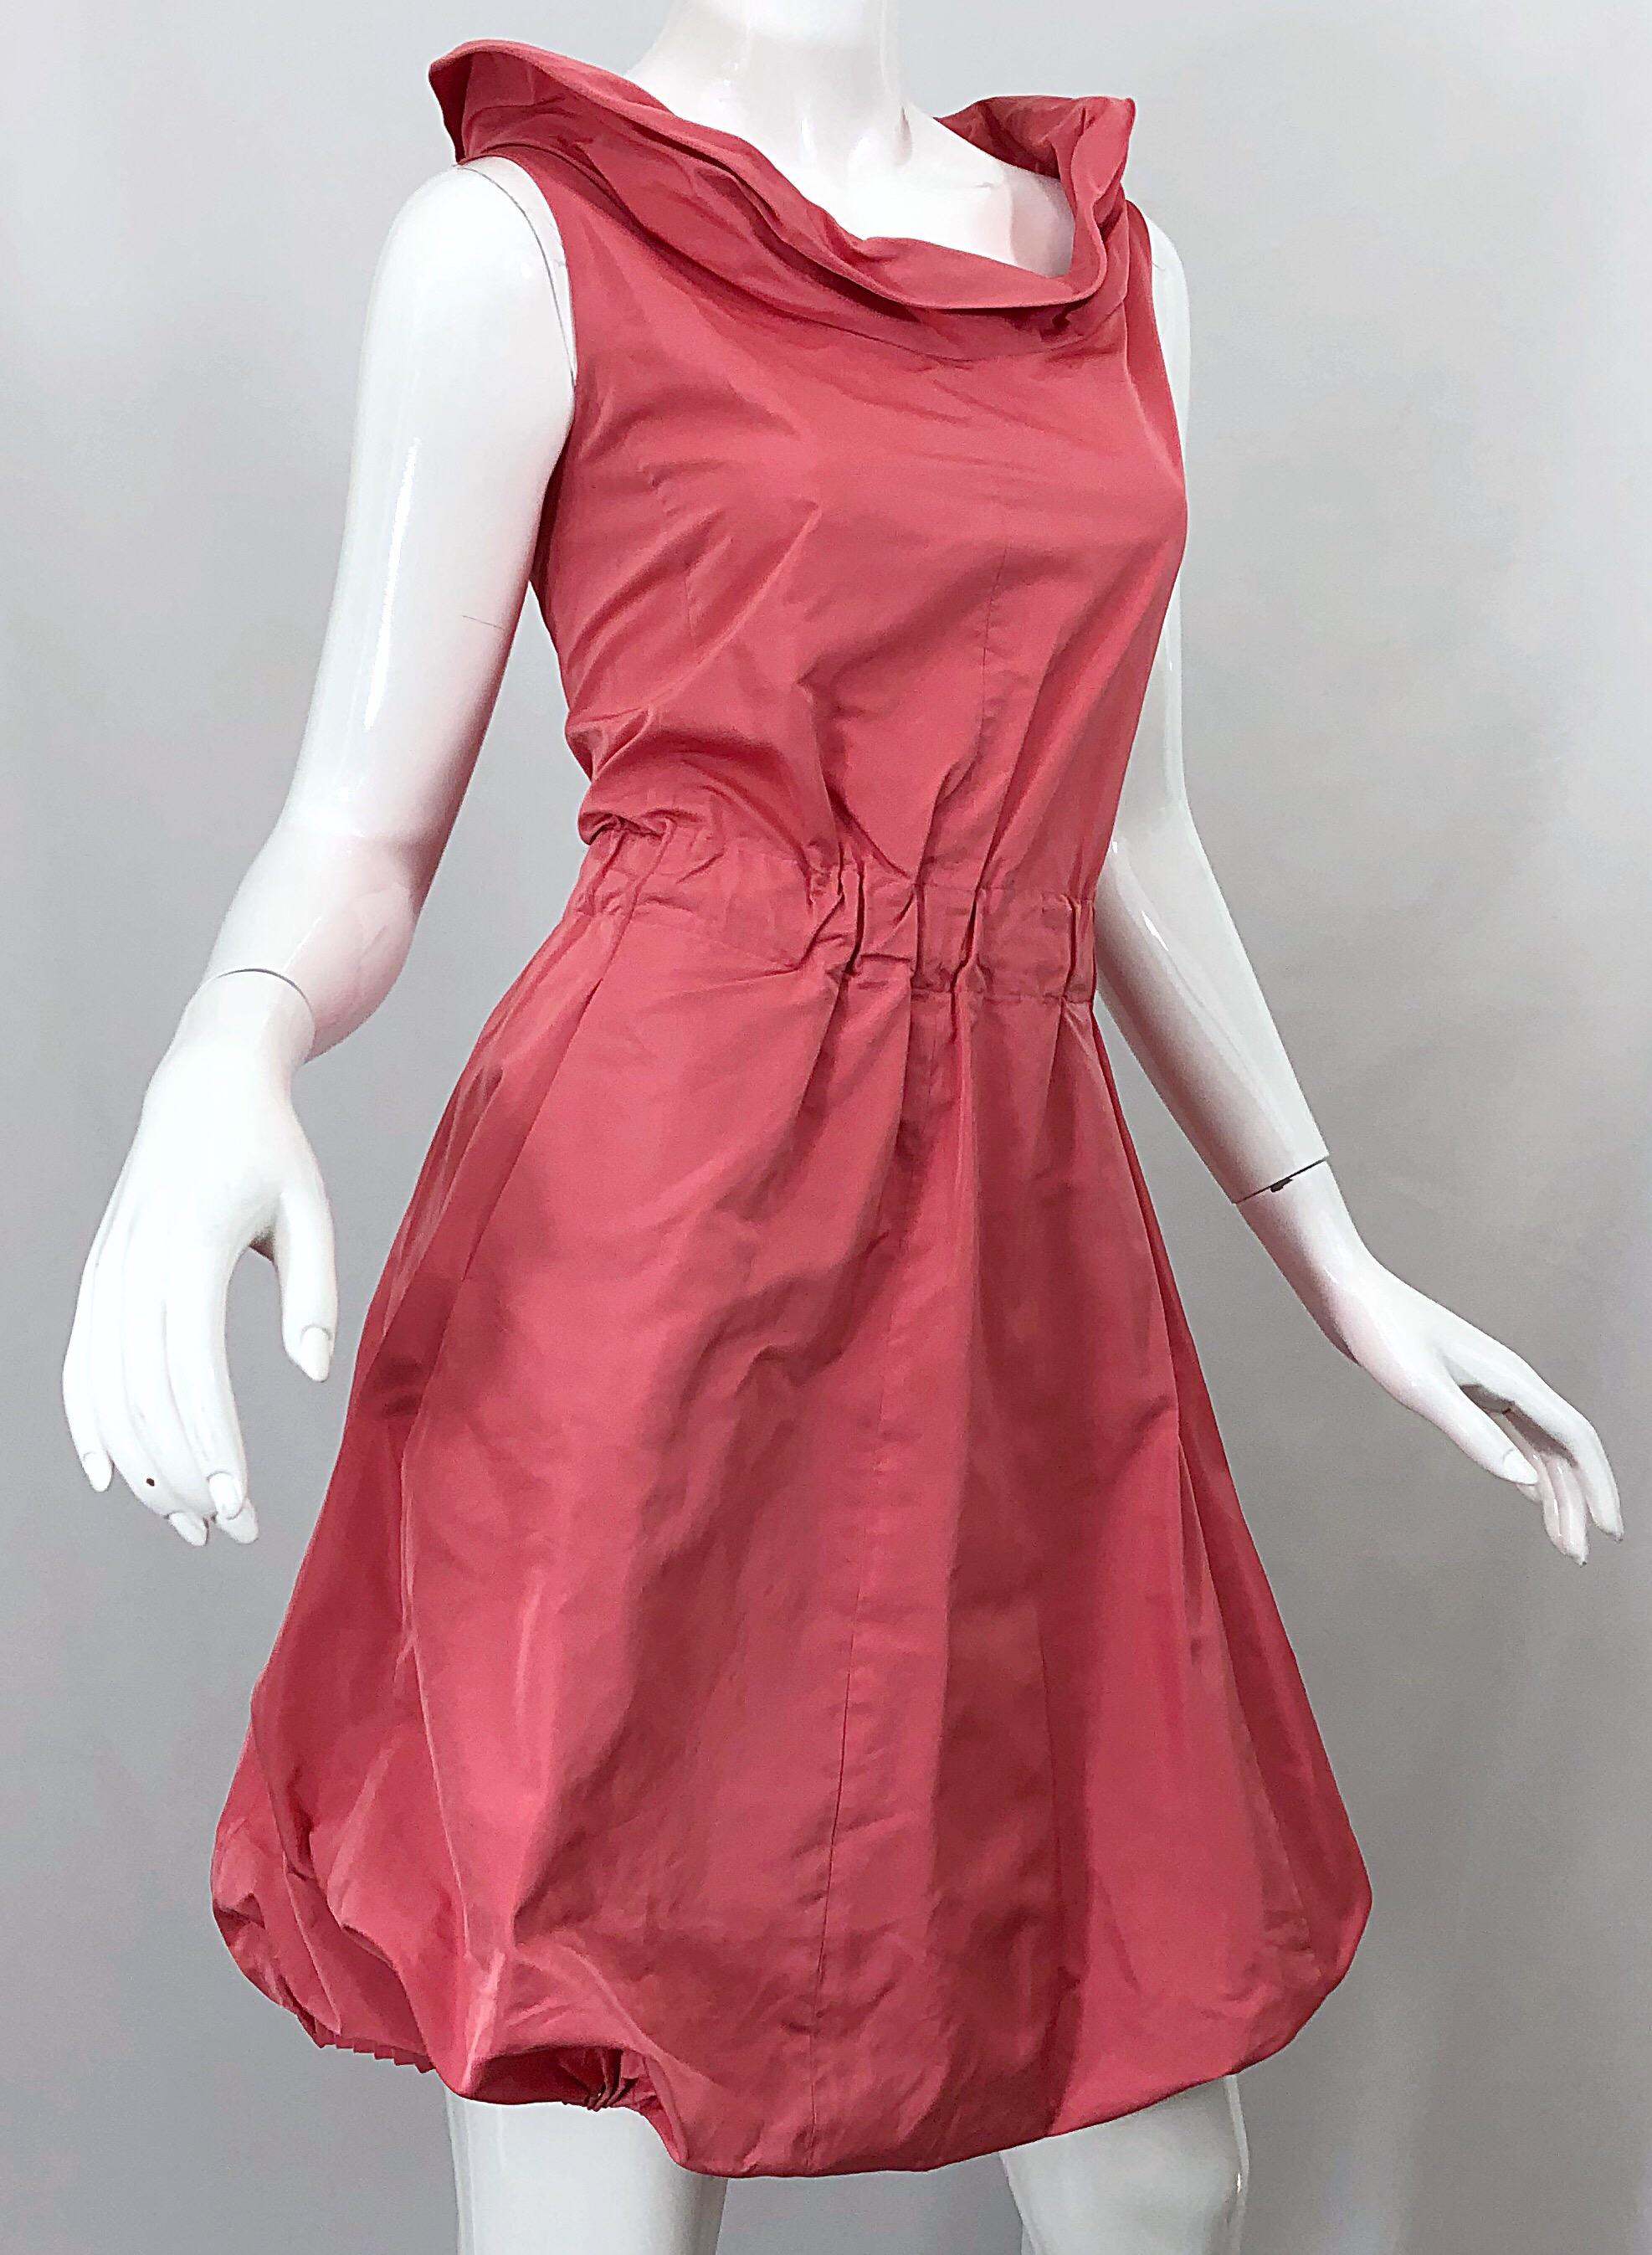 Nina Ricci Y2K Coral Pink Salmon Size 40 / US 10 Avant Garde Bubble Hem Dress In Excellent Condition For Sale In San Diego, CA